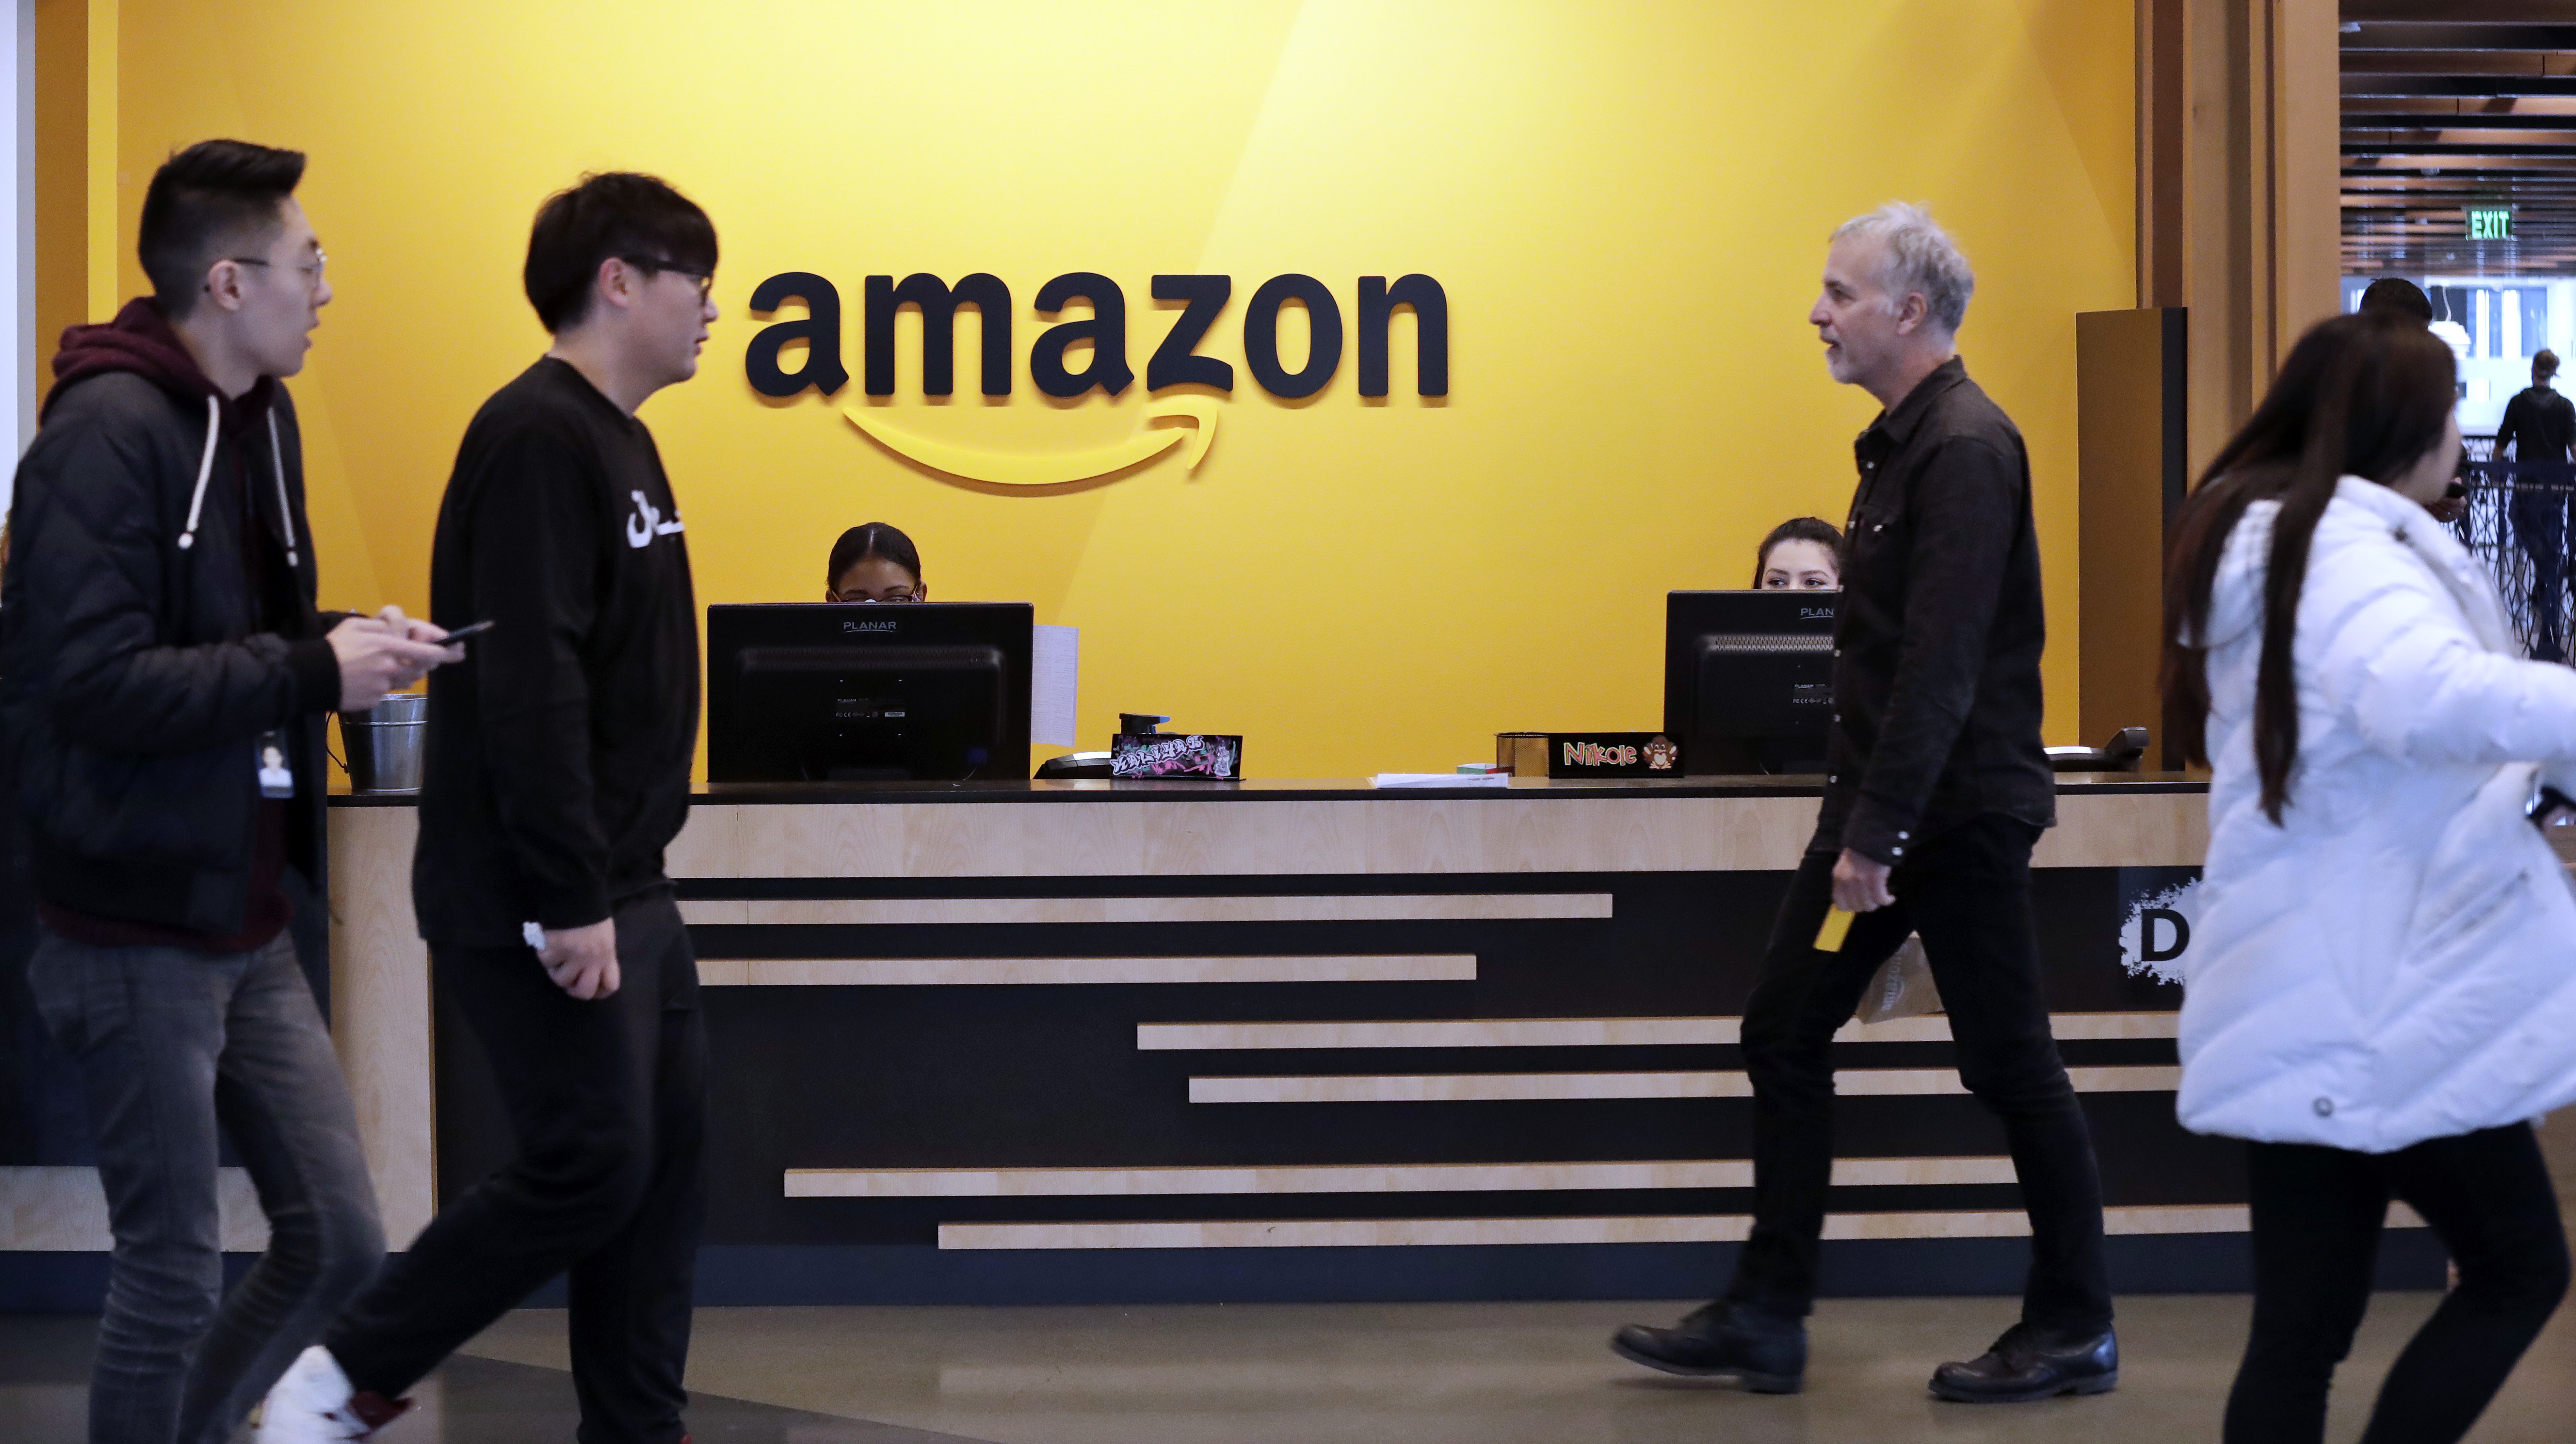 FILE - In this Nov. 13, 2018 file photo, employees walk through a lobby at Amazon's headquarters in Seattle. On Friday, May 3, 2019, shares in Amazon are moving higher after billionaire investor Warren Buffett said his firm has been buying the online retailer. (AP Photo/Elaine Thompson)